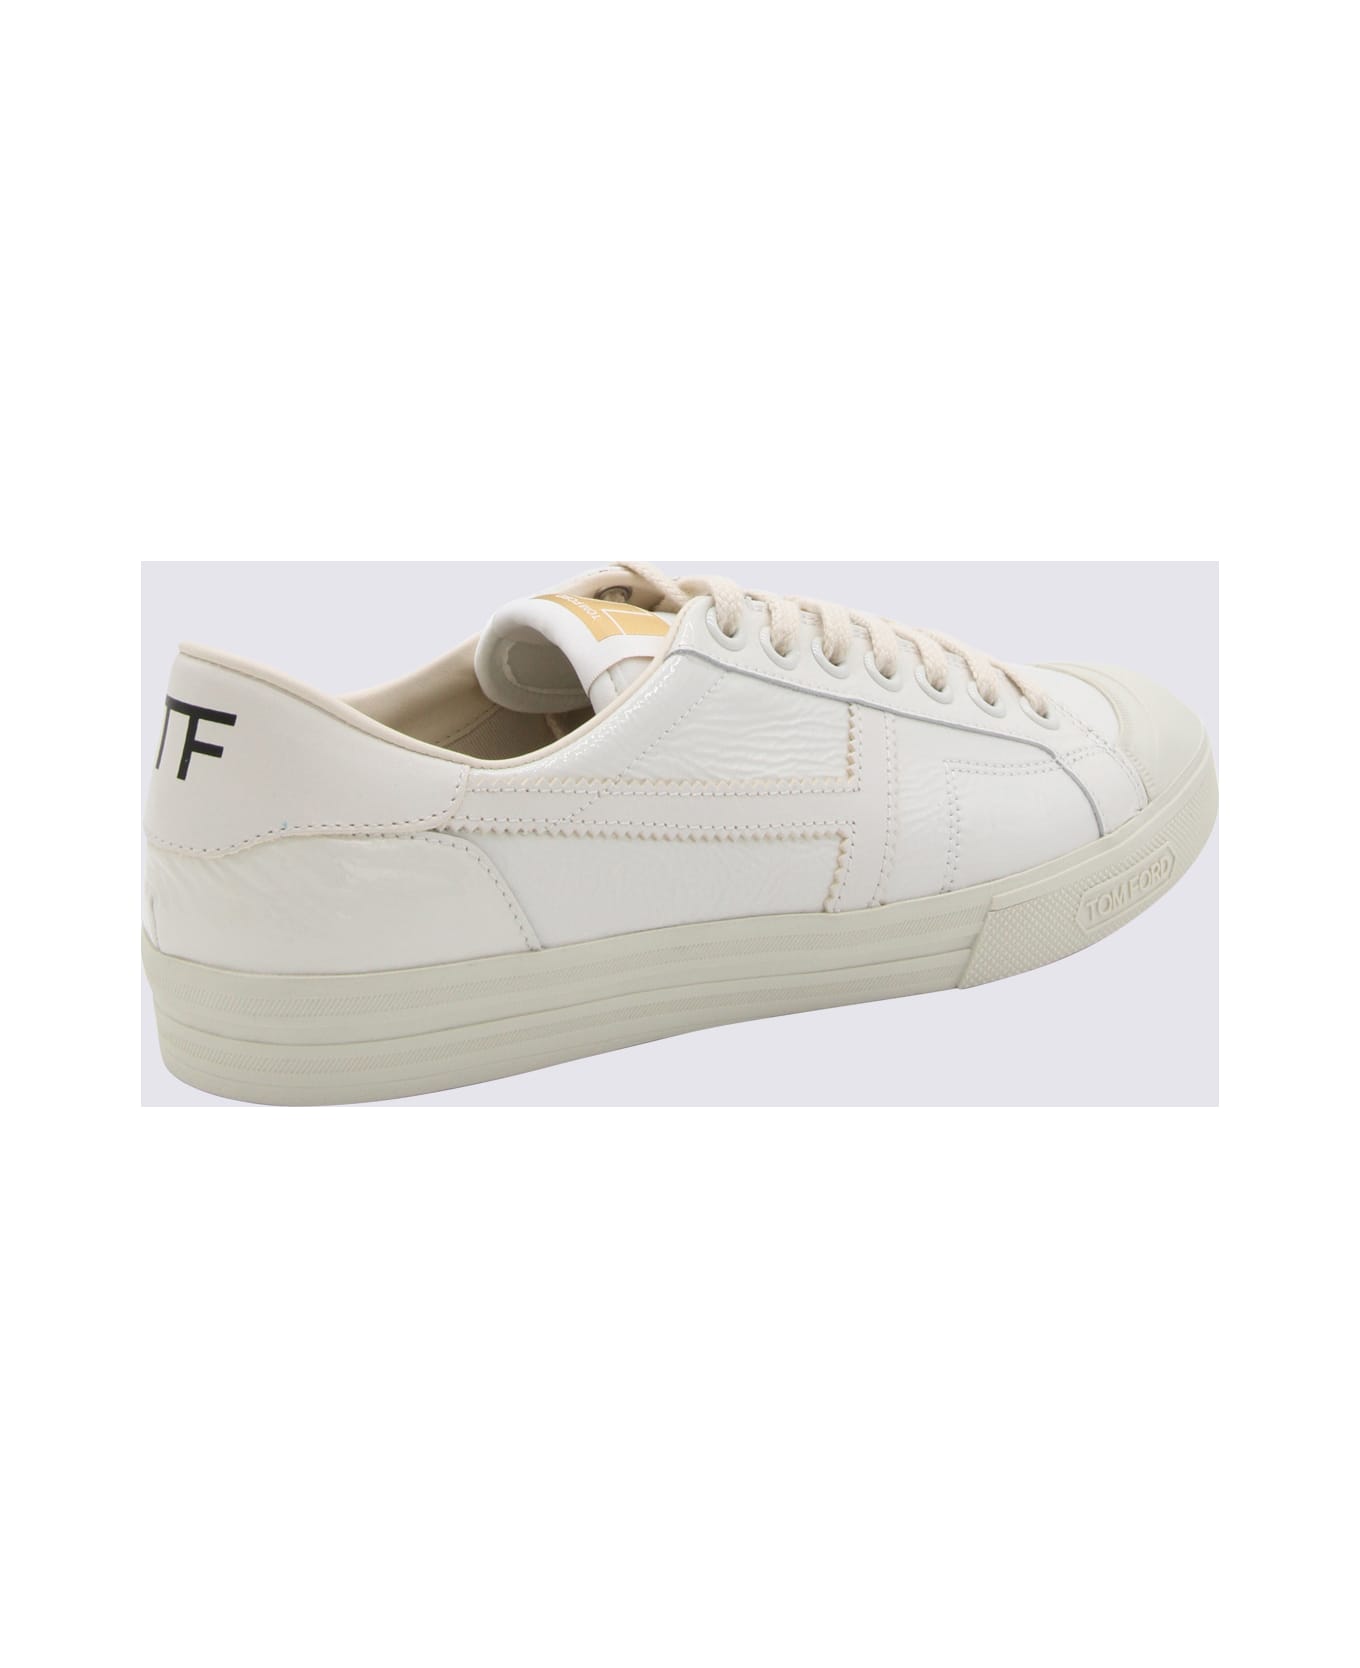 Tom Ford White Leather Low Top Sneakers - CHALK + CREAM